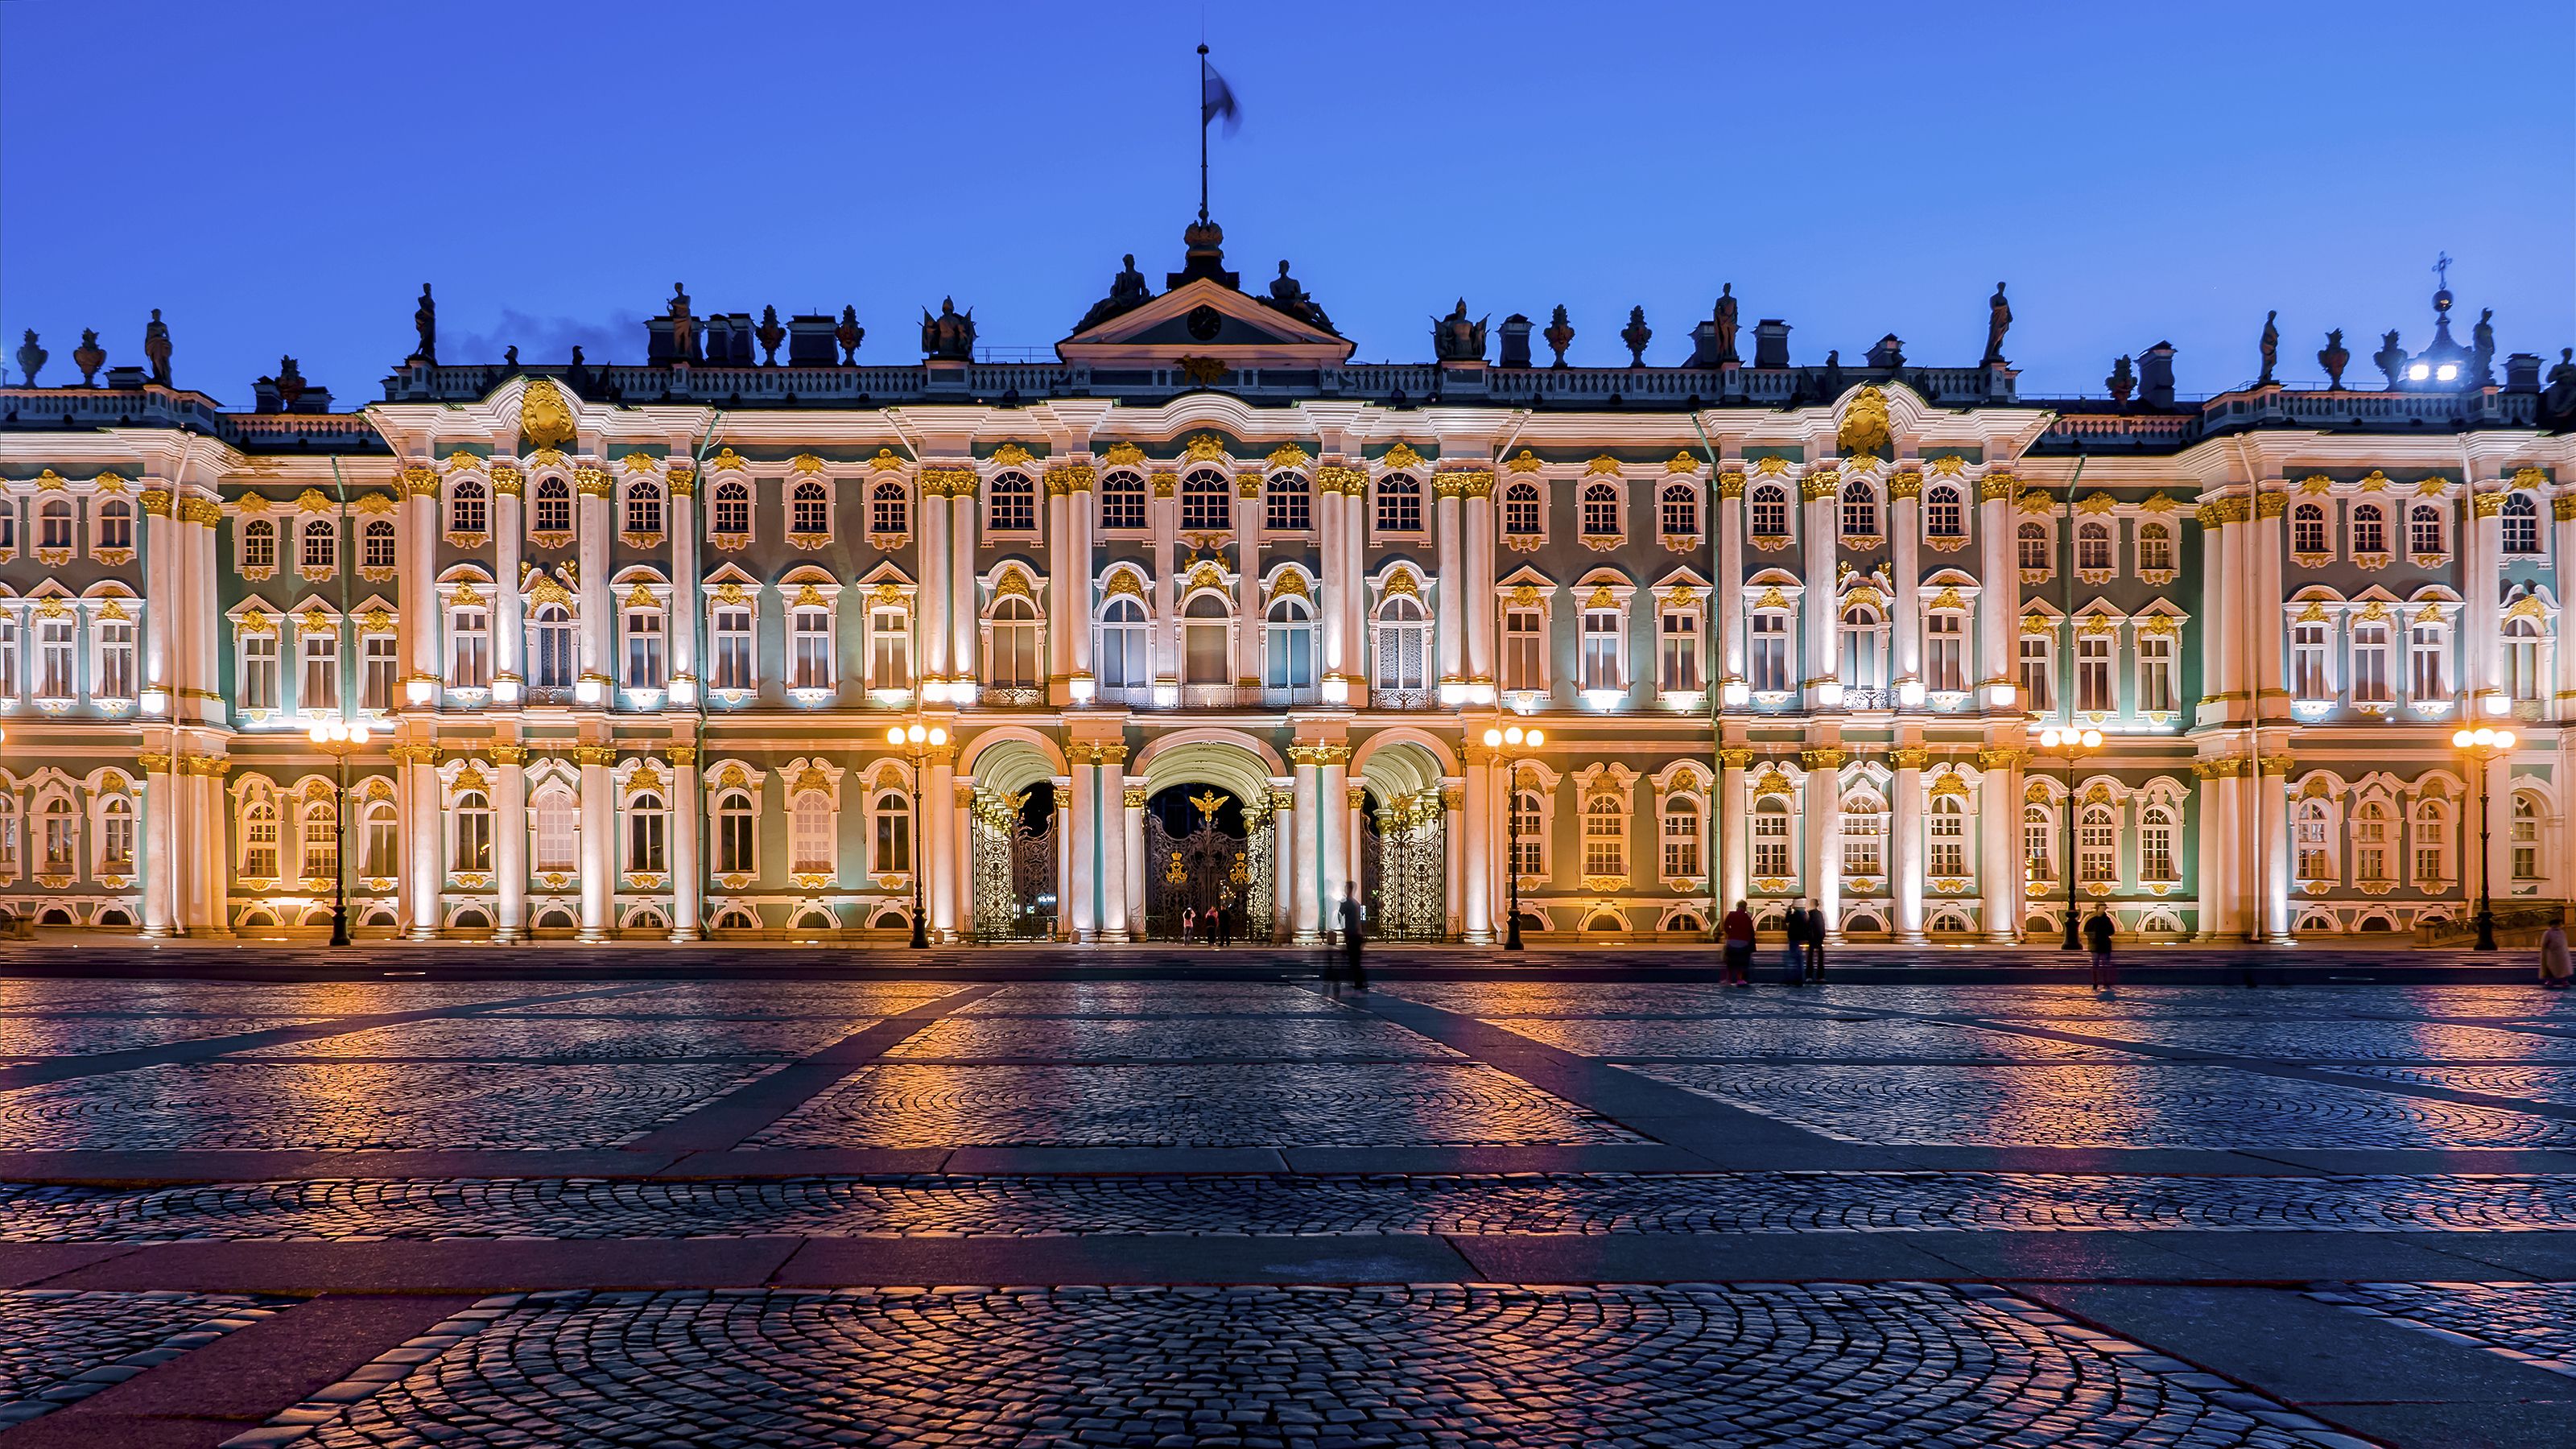 The State Hermitage Museum is a museum of art and culture located in ...